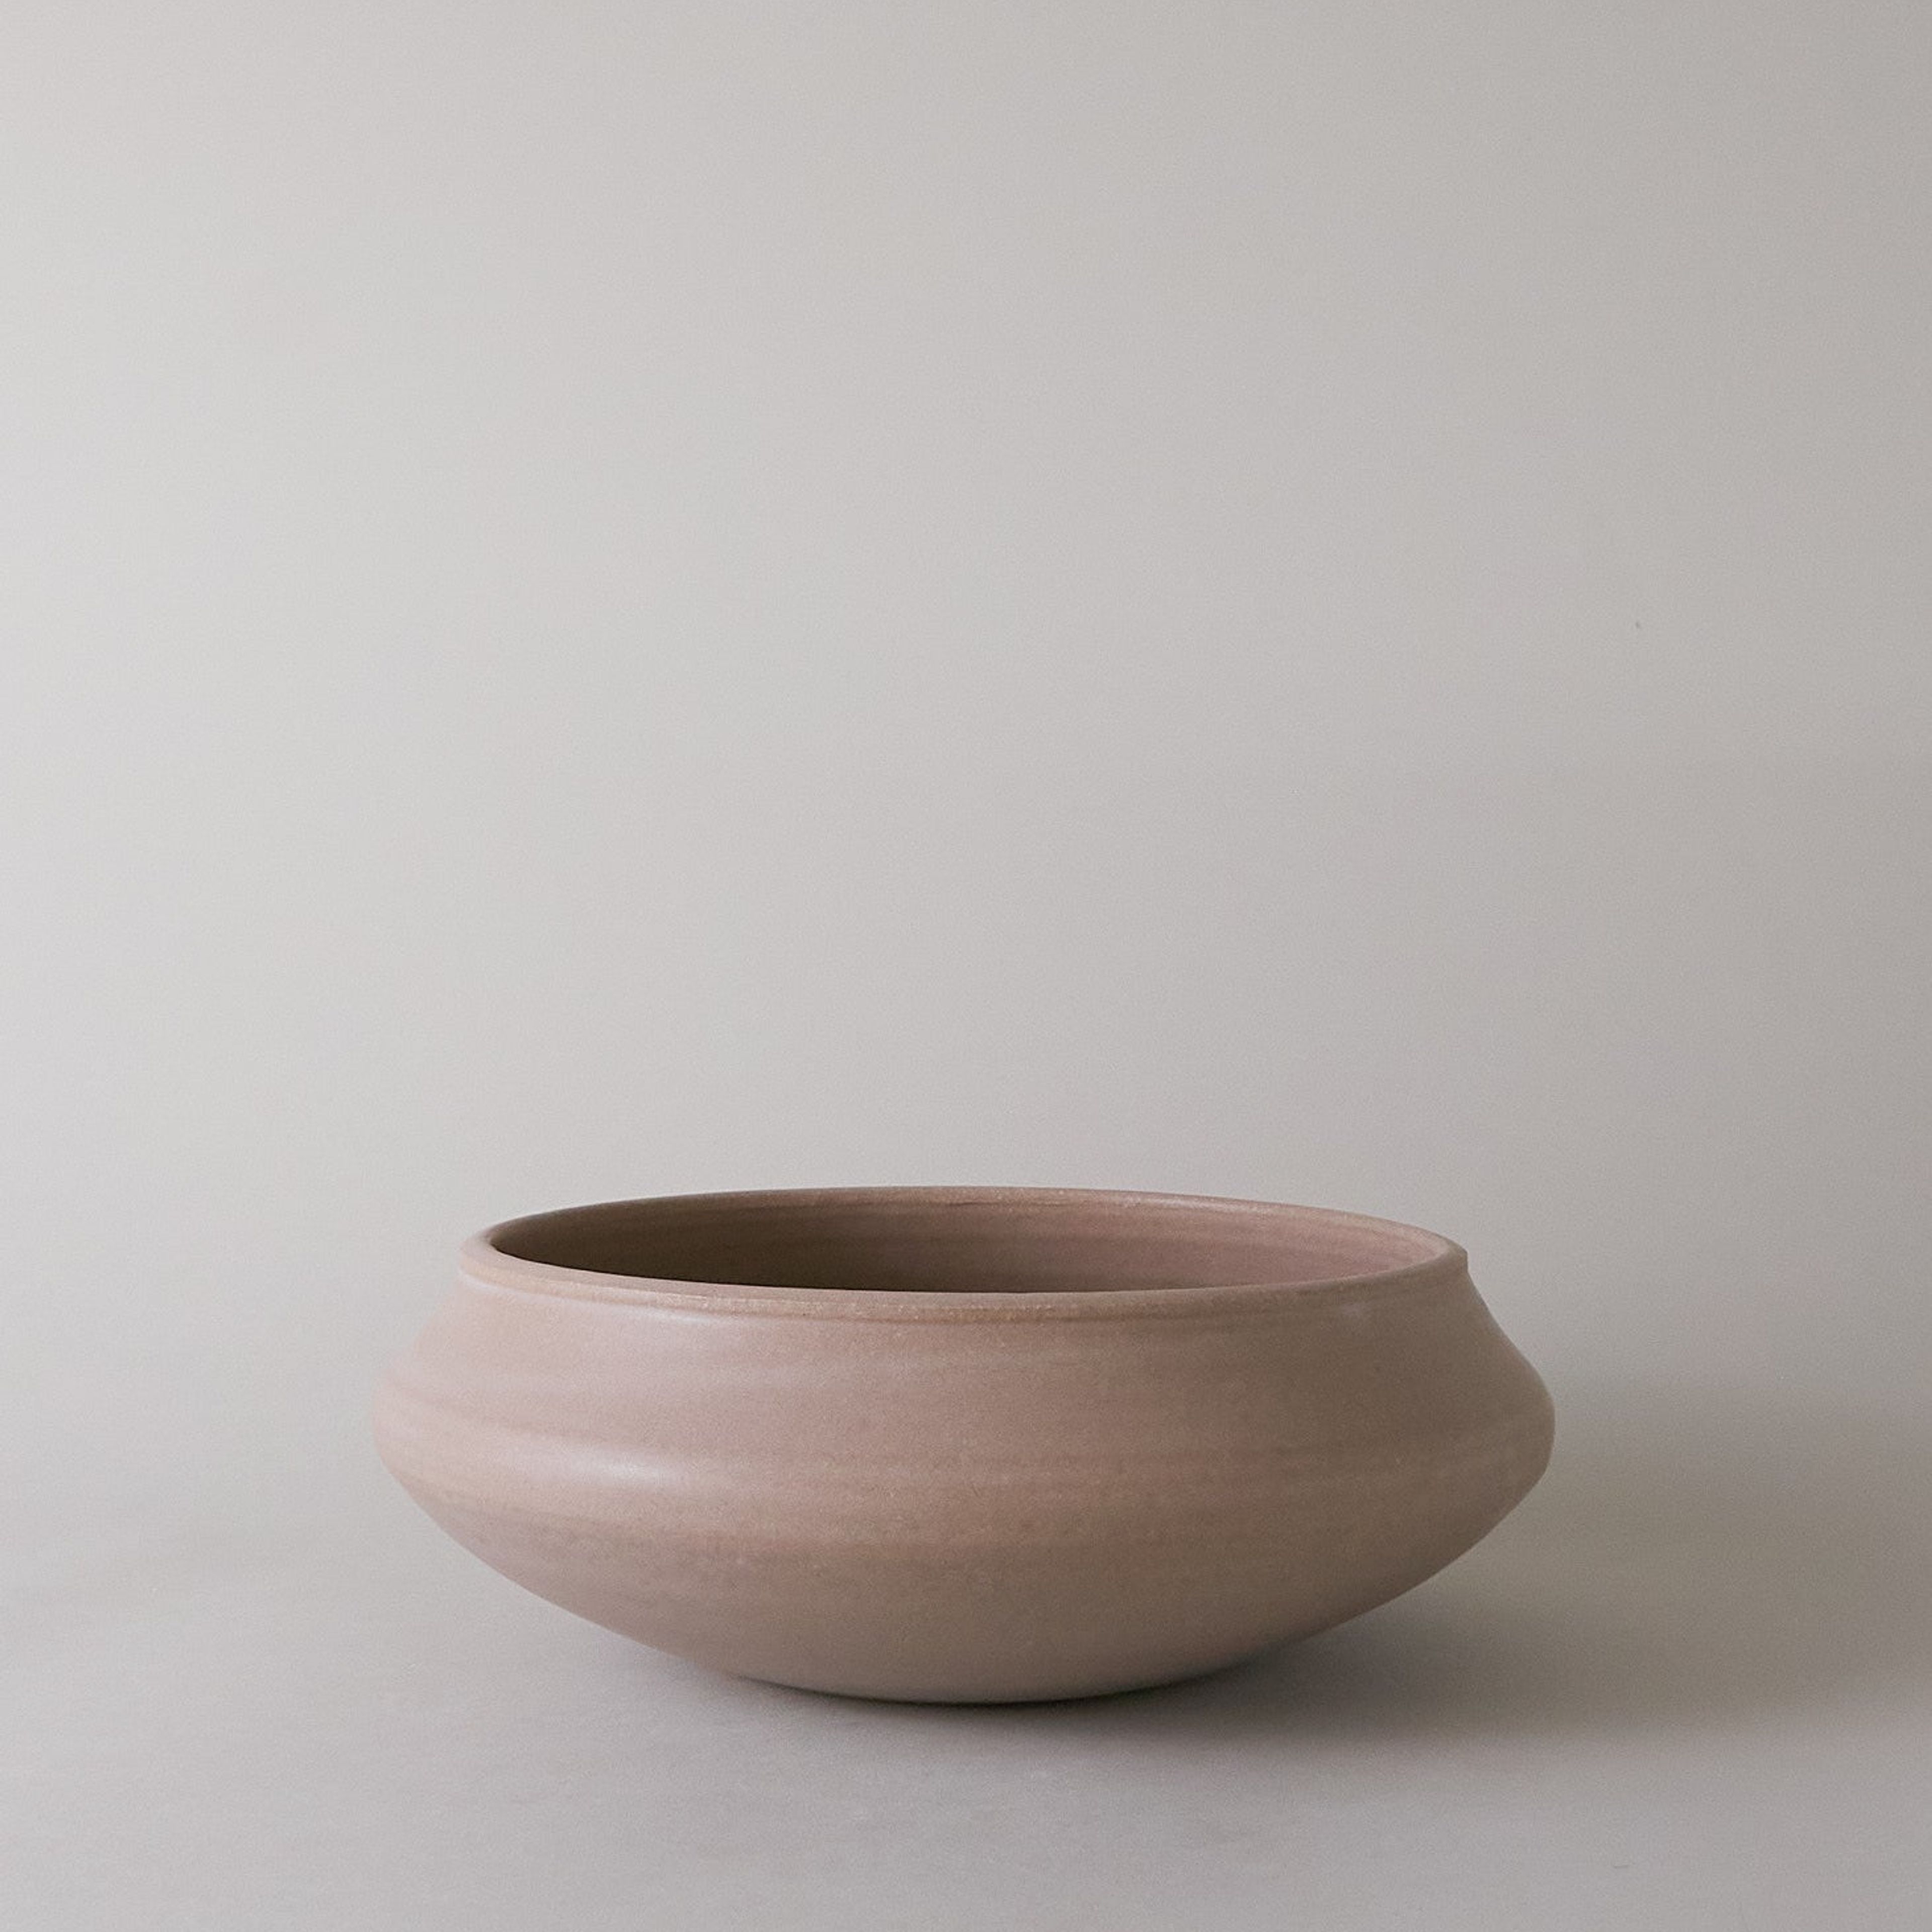 Small Rounded Bowl in Nude